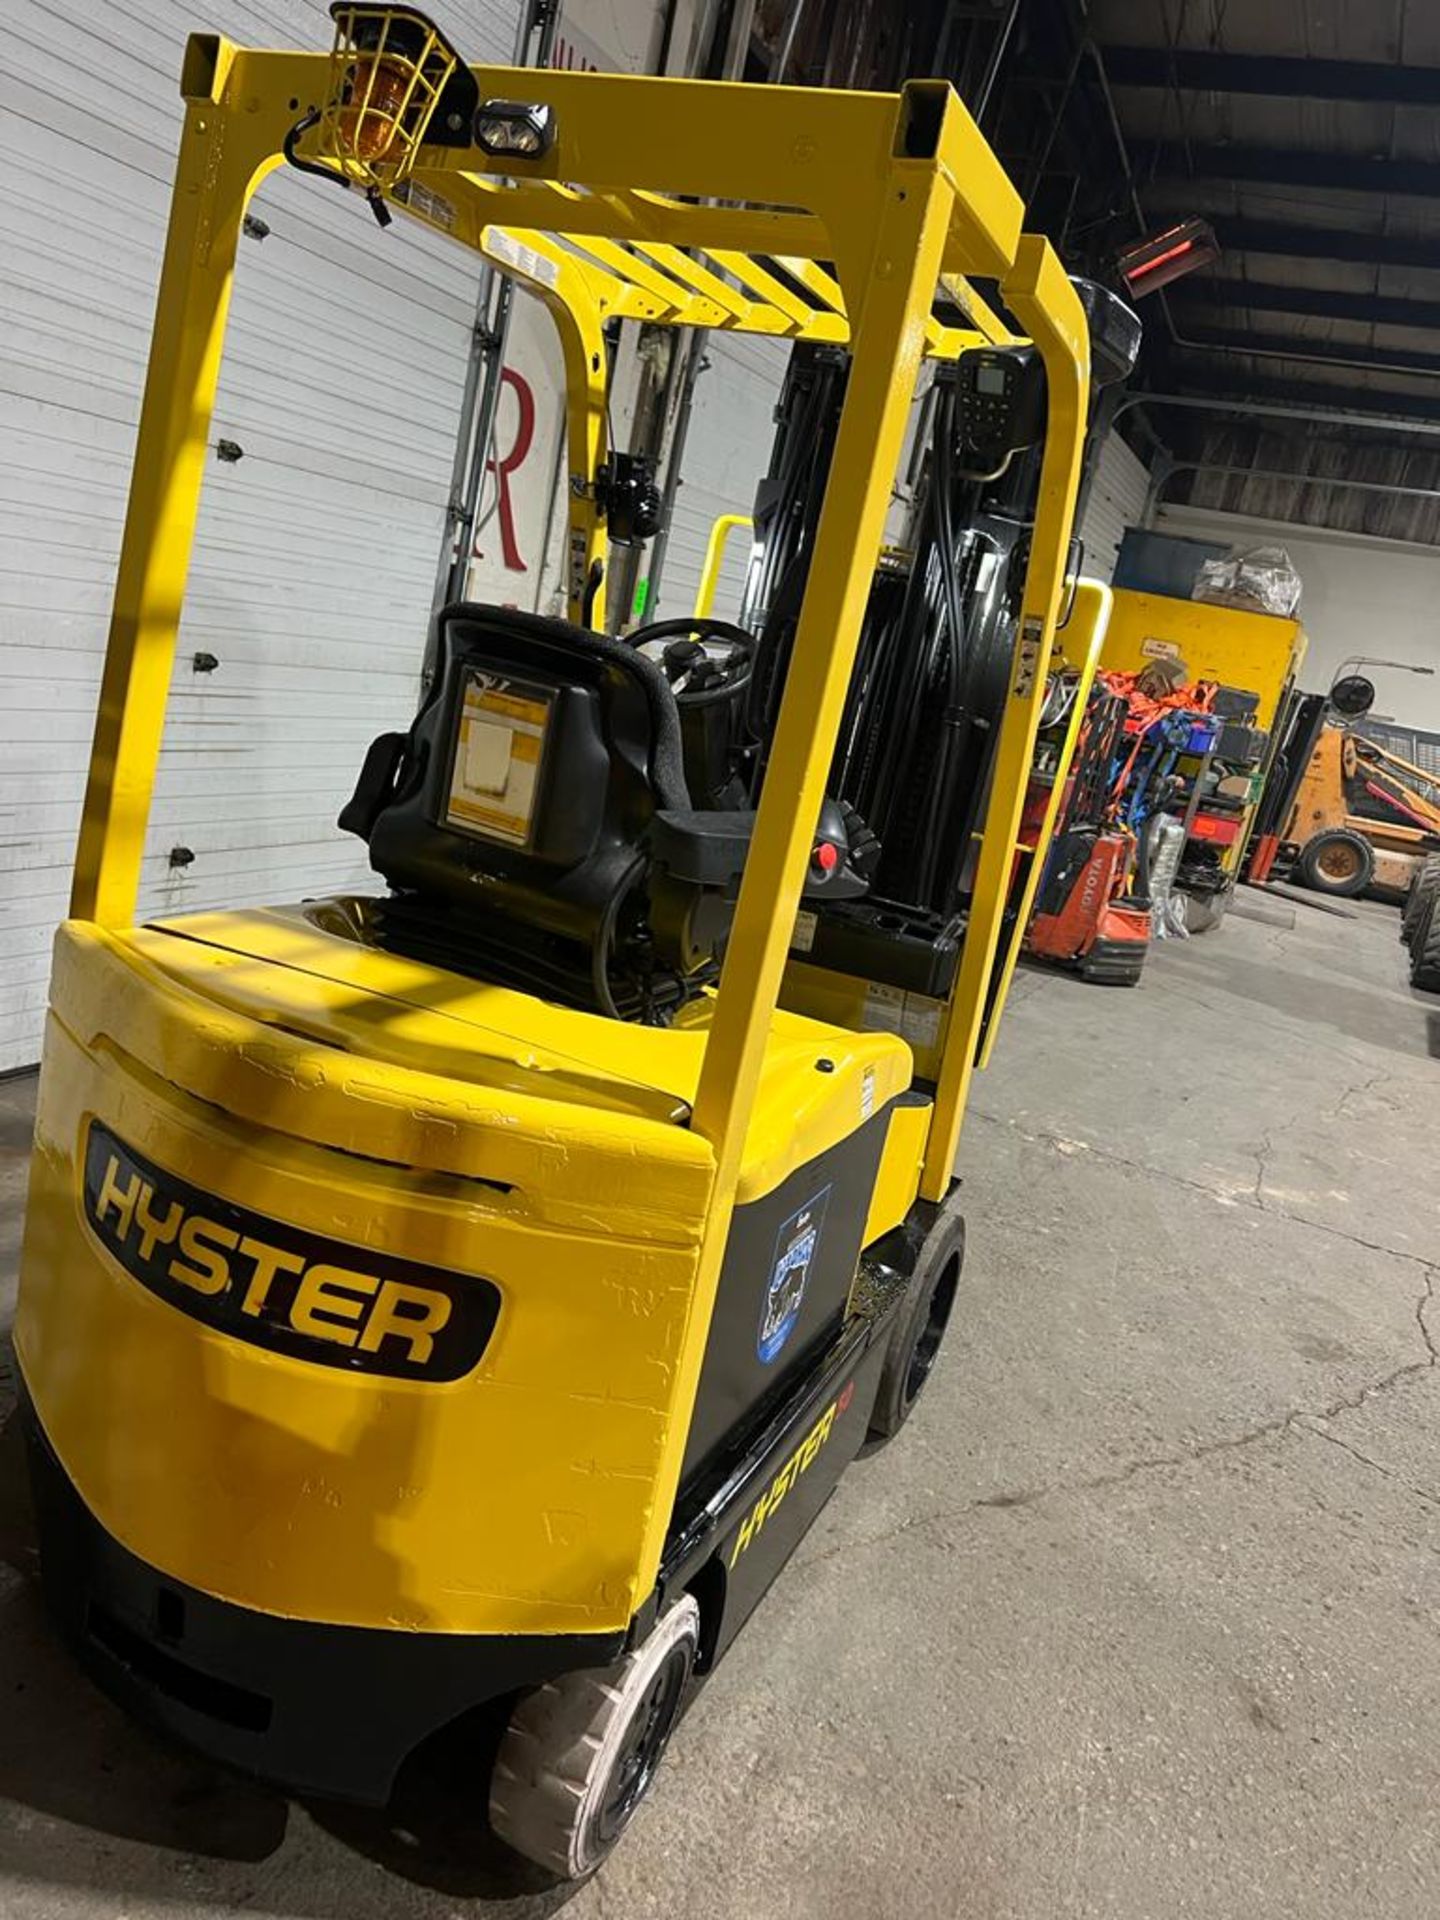 2013 Hyster 5,000lbs Capacity Forklift 4-STAGE MAST Electric 48V with Sideshift & Safety to APR 2024 - Image 5 of 5